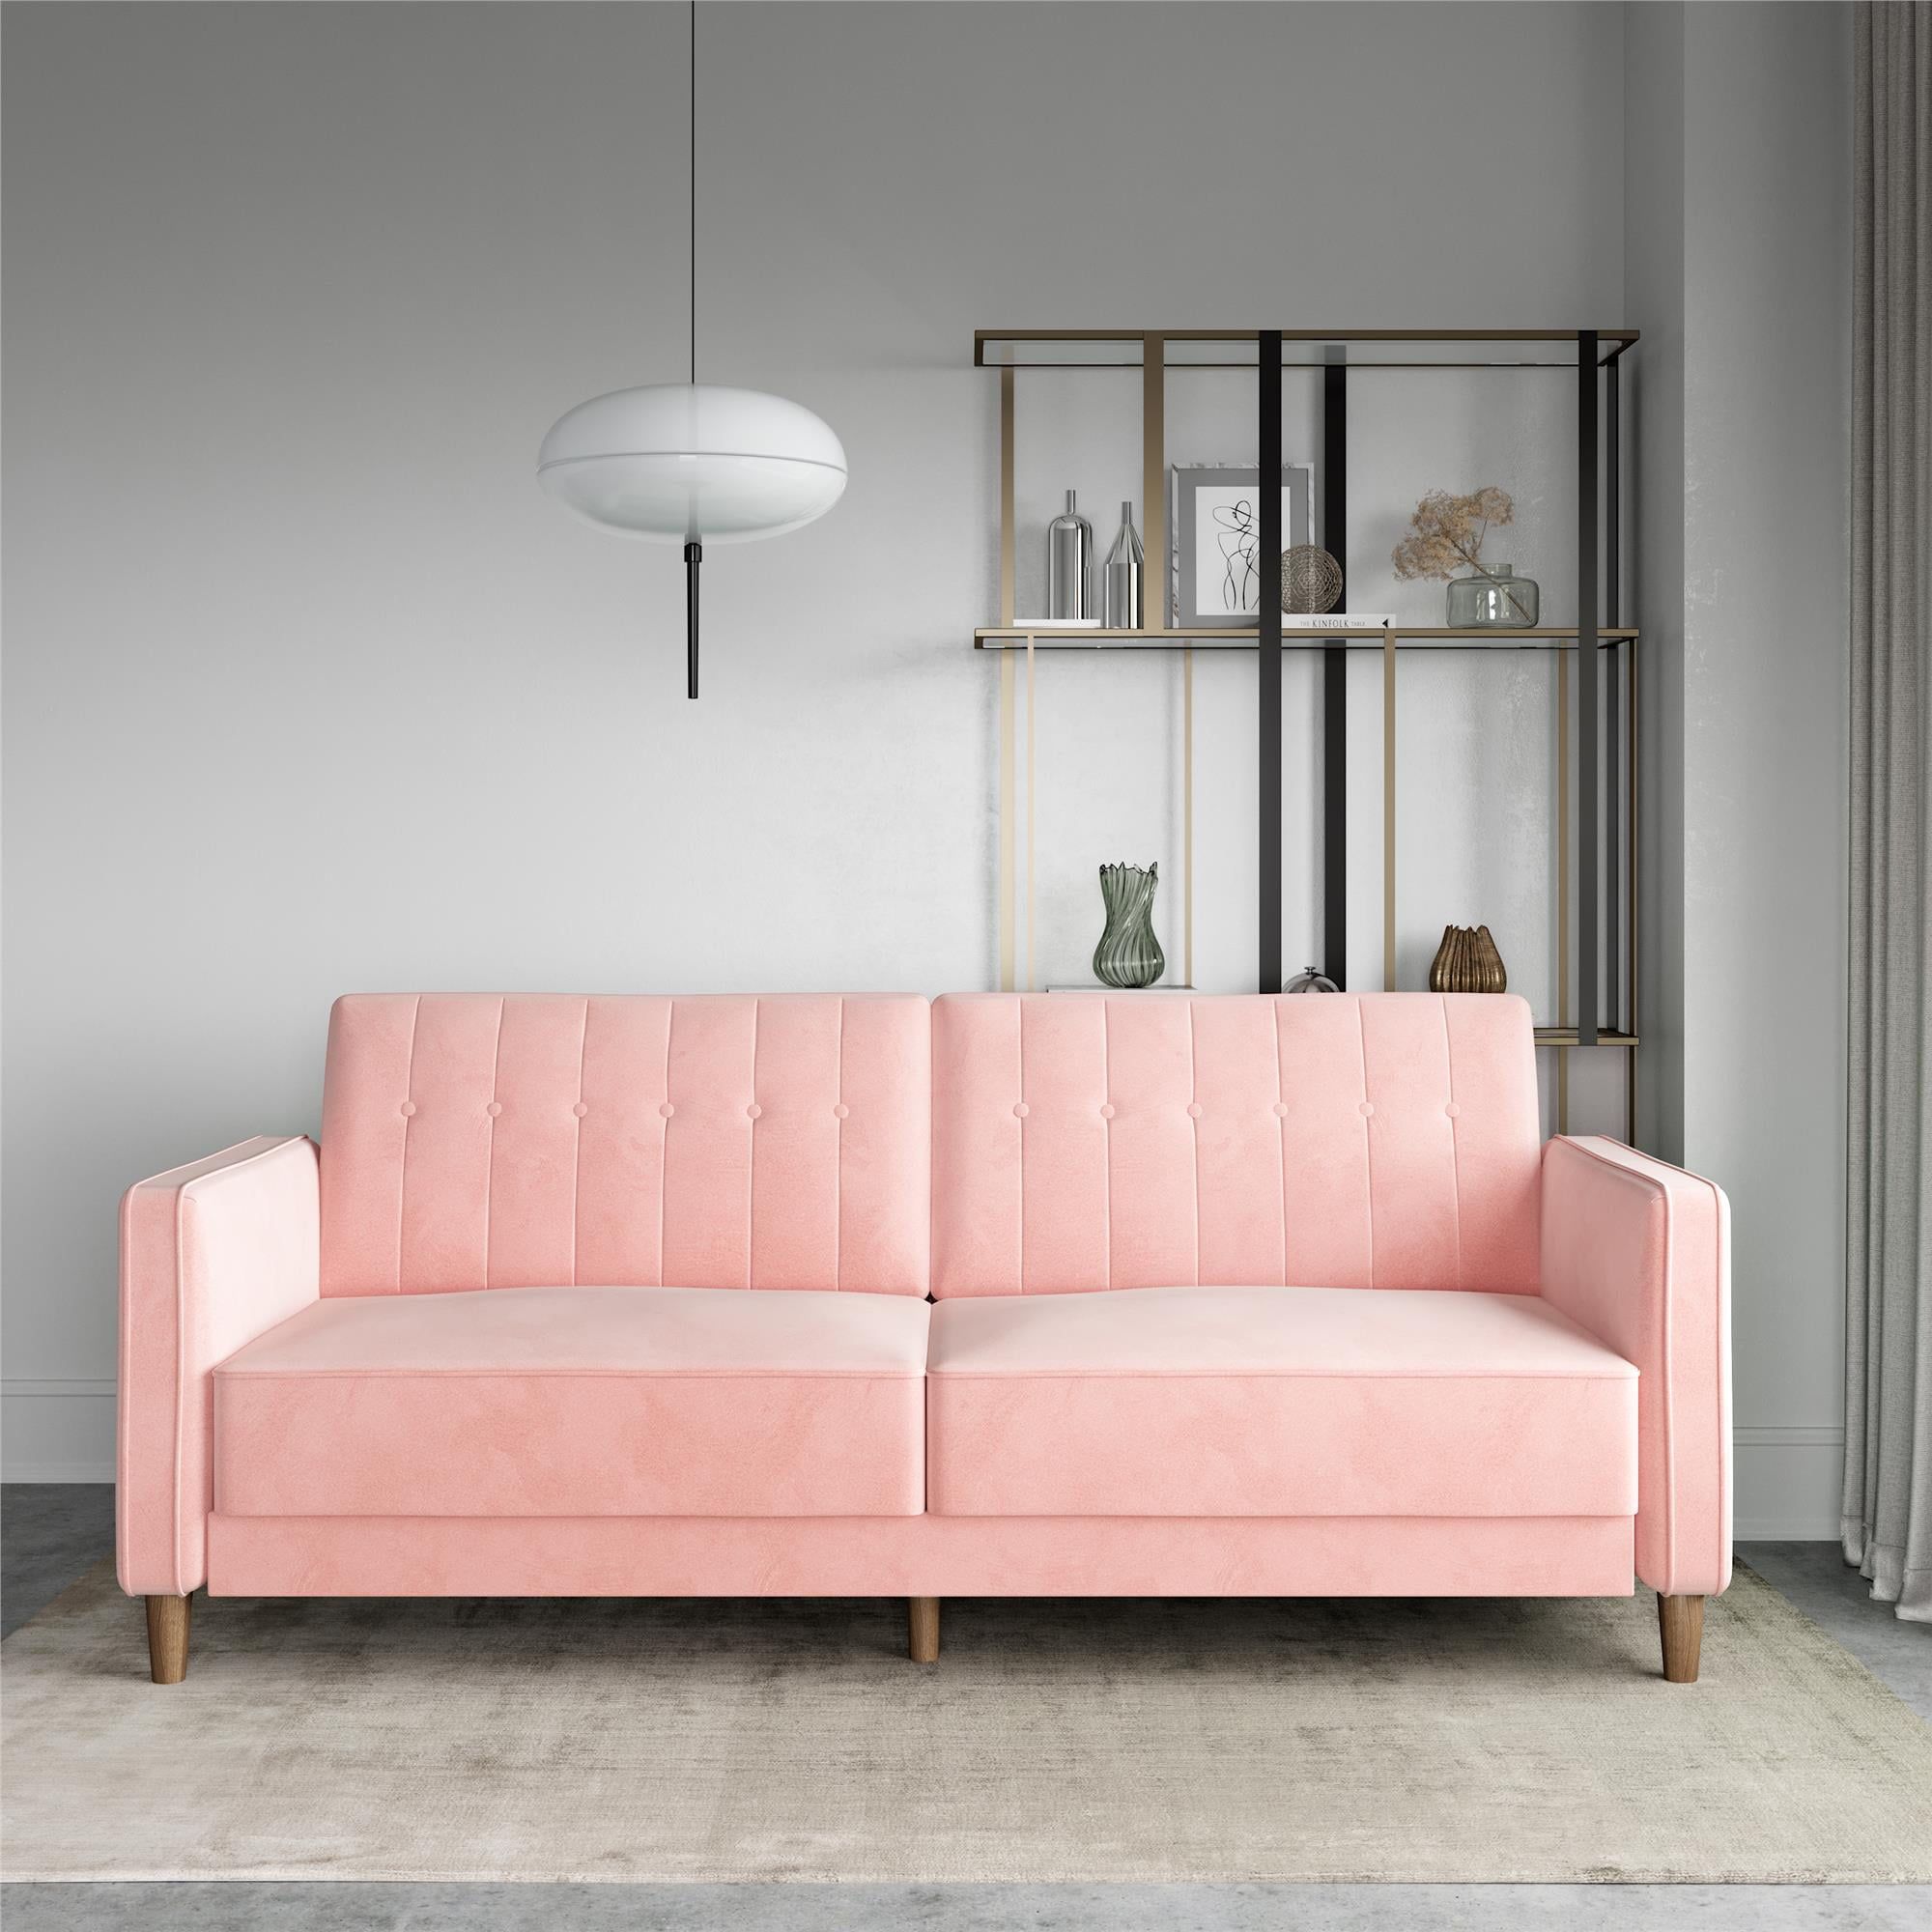 Dhp Pin Tufted Transitional Futon, Convertible Sofa Couch, Pink Velvet Within Tufted Convertible Sleeper Sofas (Gallery 9 of 20)